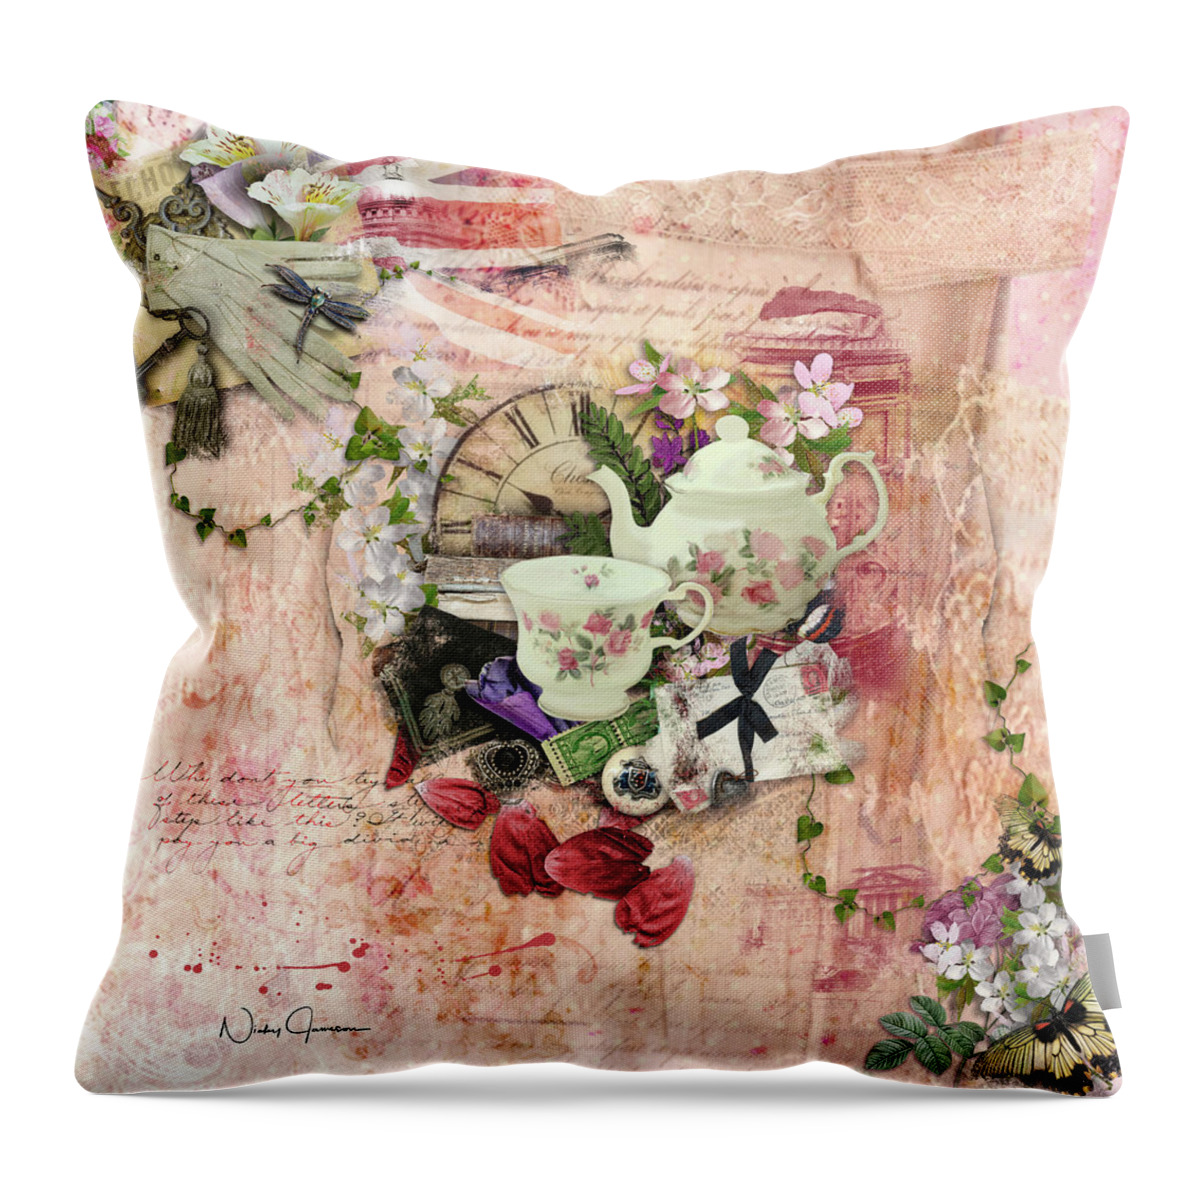 British Throw Pillow featuring the mixed media Afternoon Tea by Nicky Jameson